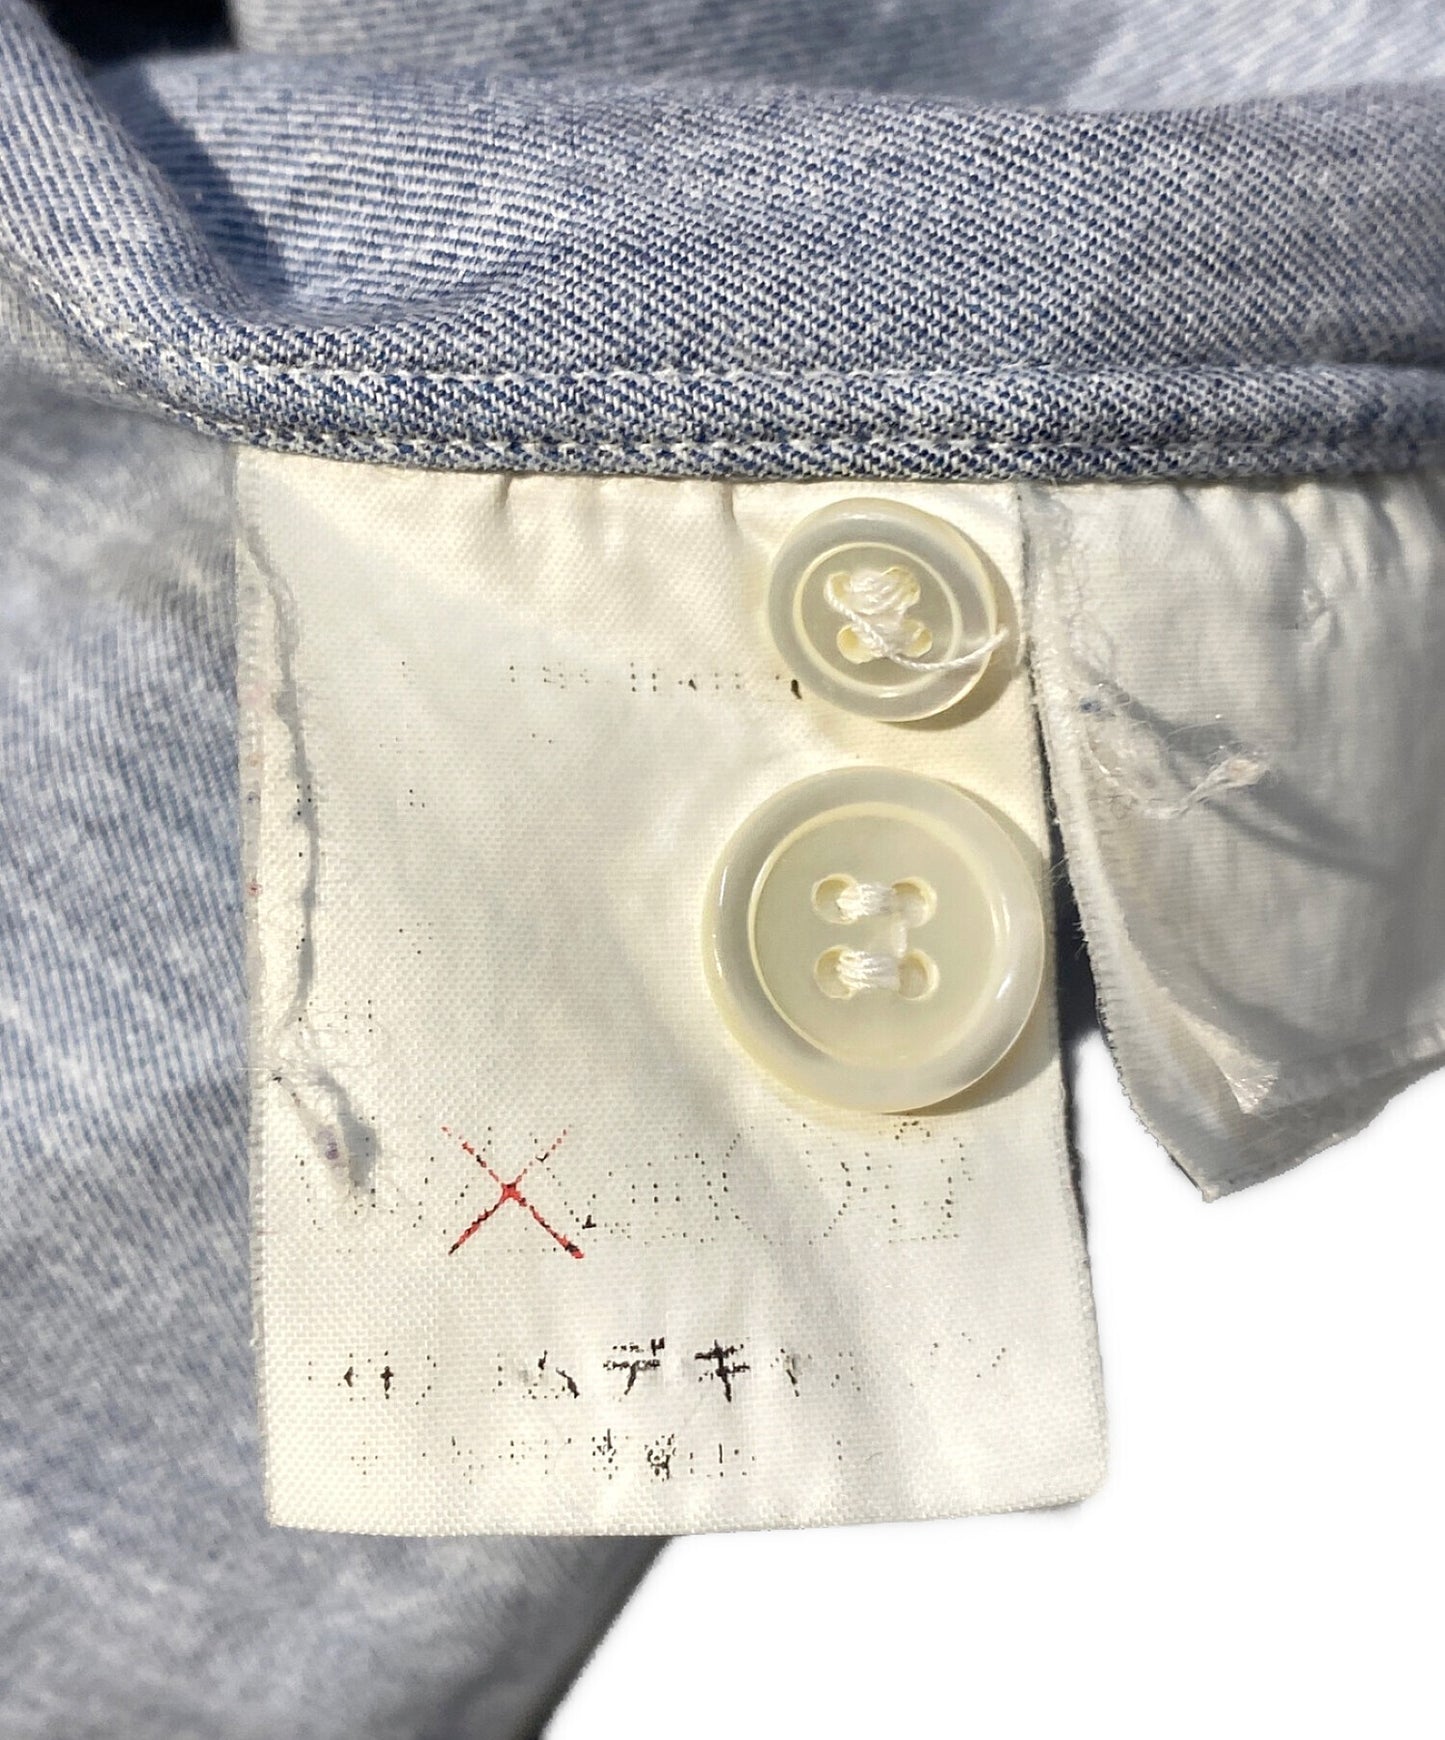 [Pre-owned] COMME des GARCONS HOMME Oversize open collar shirt / AD1998 / Tanaka period / Archive AD1998.